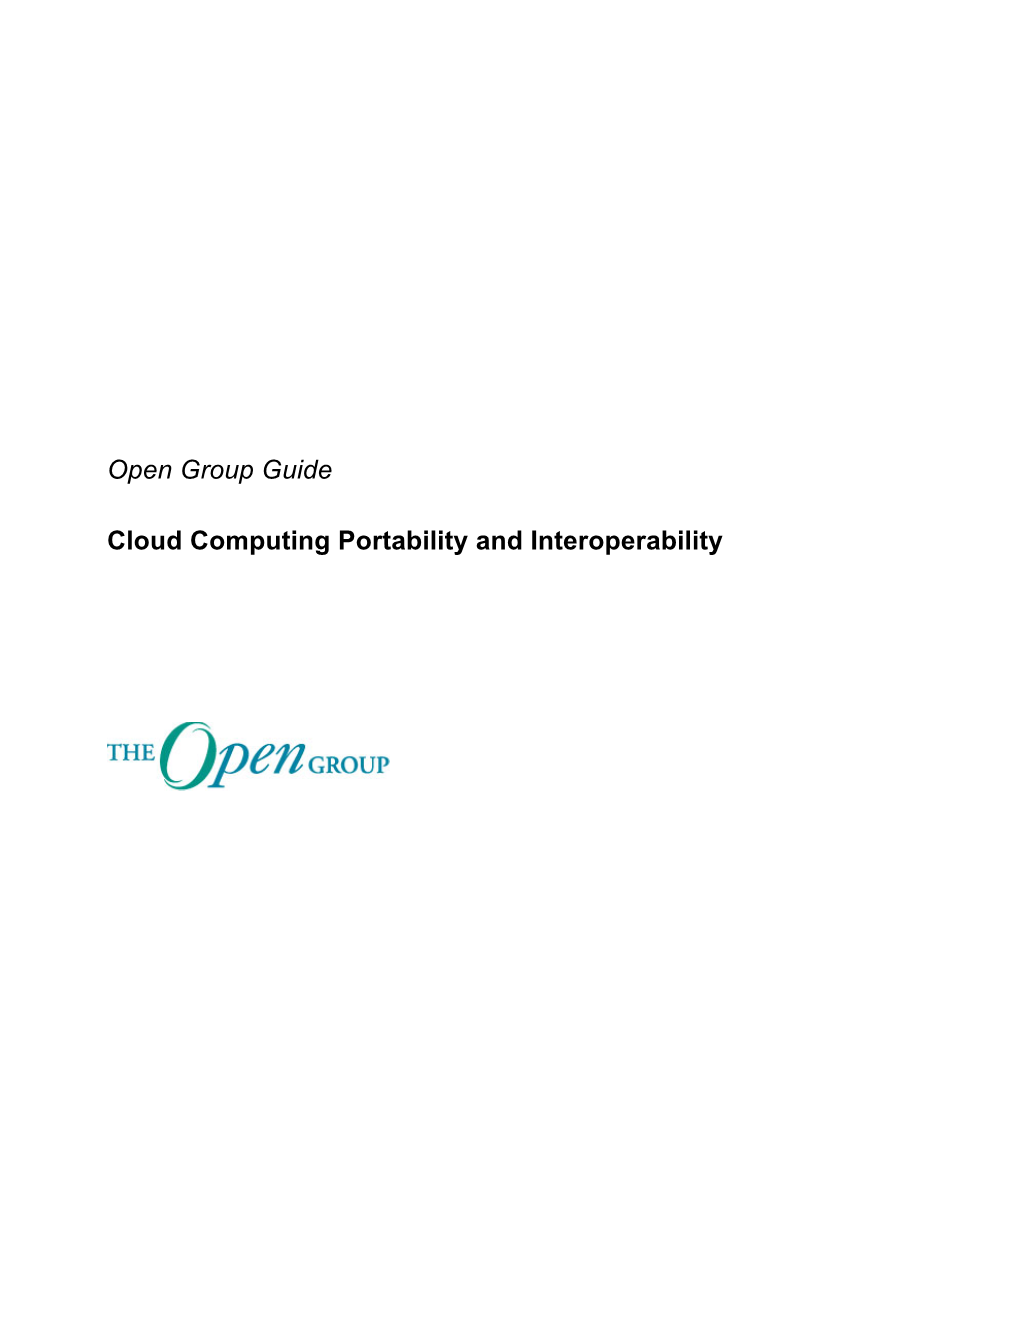 Open Group Guide Cloud Computing Portability and Interoperability